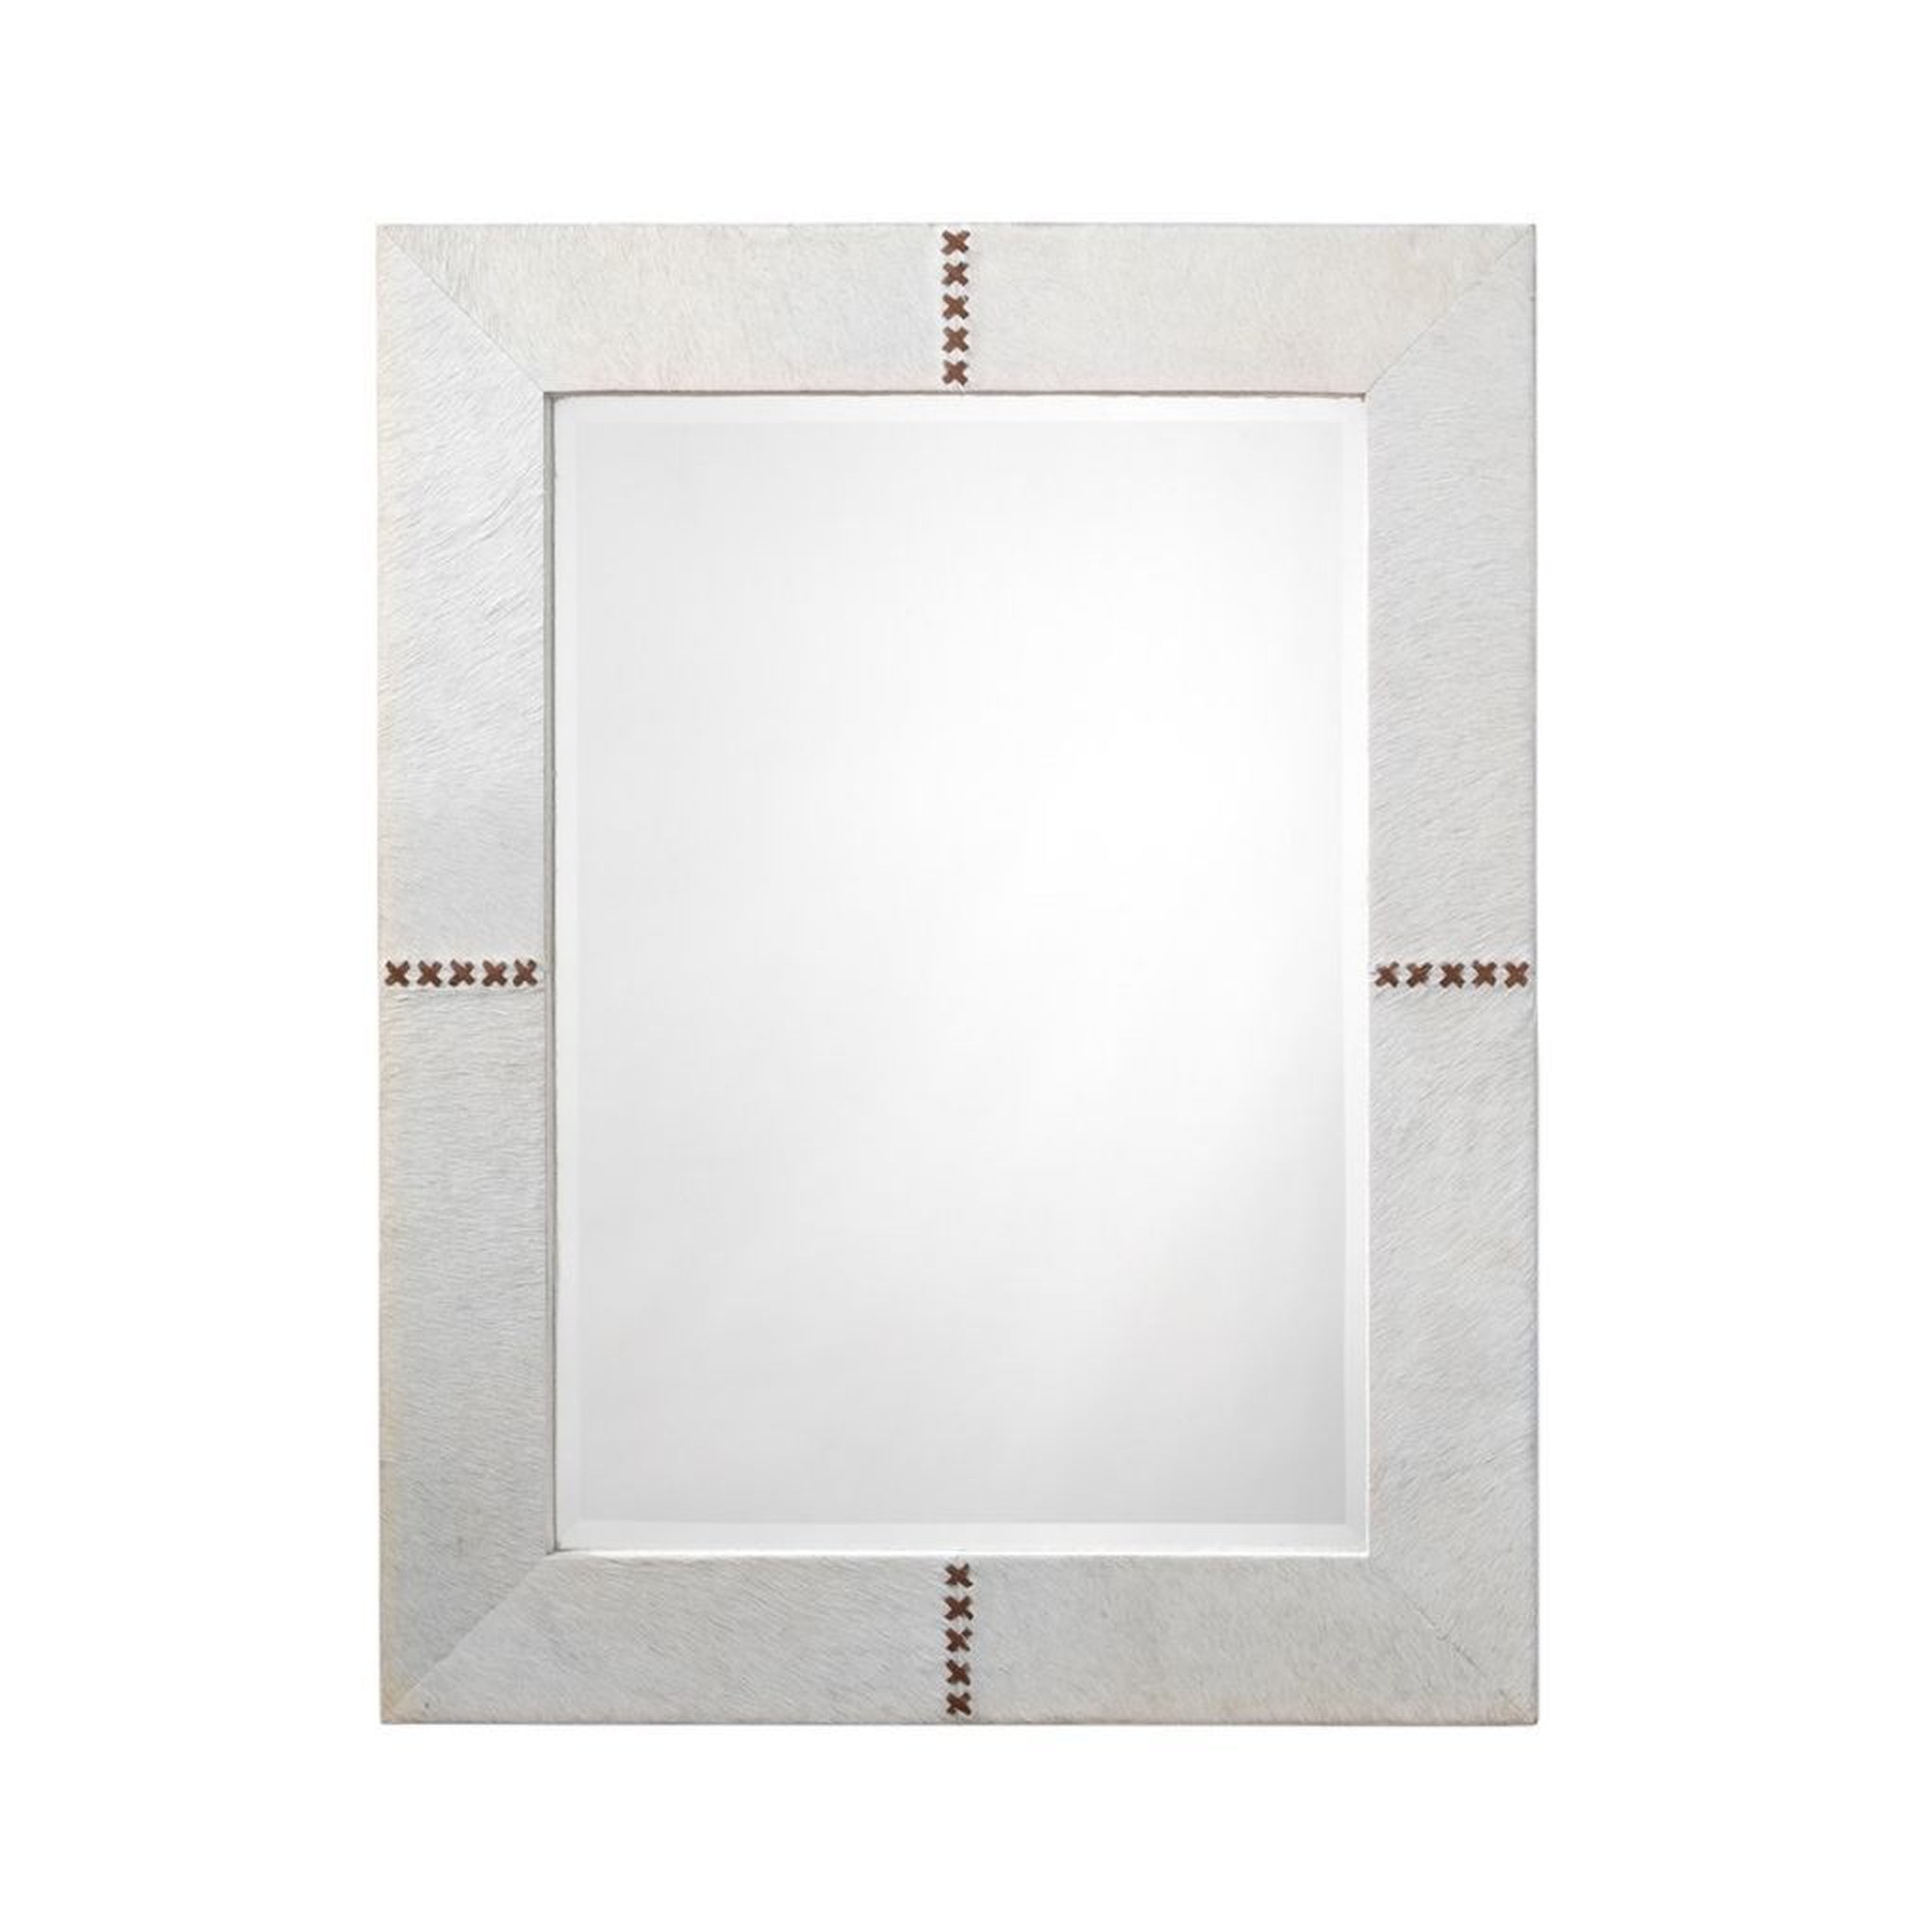 Jamie Young Co., Jamie Young Stitch 28" x 36" Rectangle Mirror With White Hide Frame With Leather Brown Stitching Accents